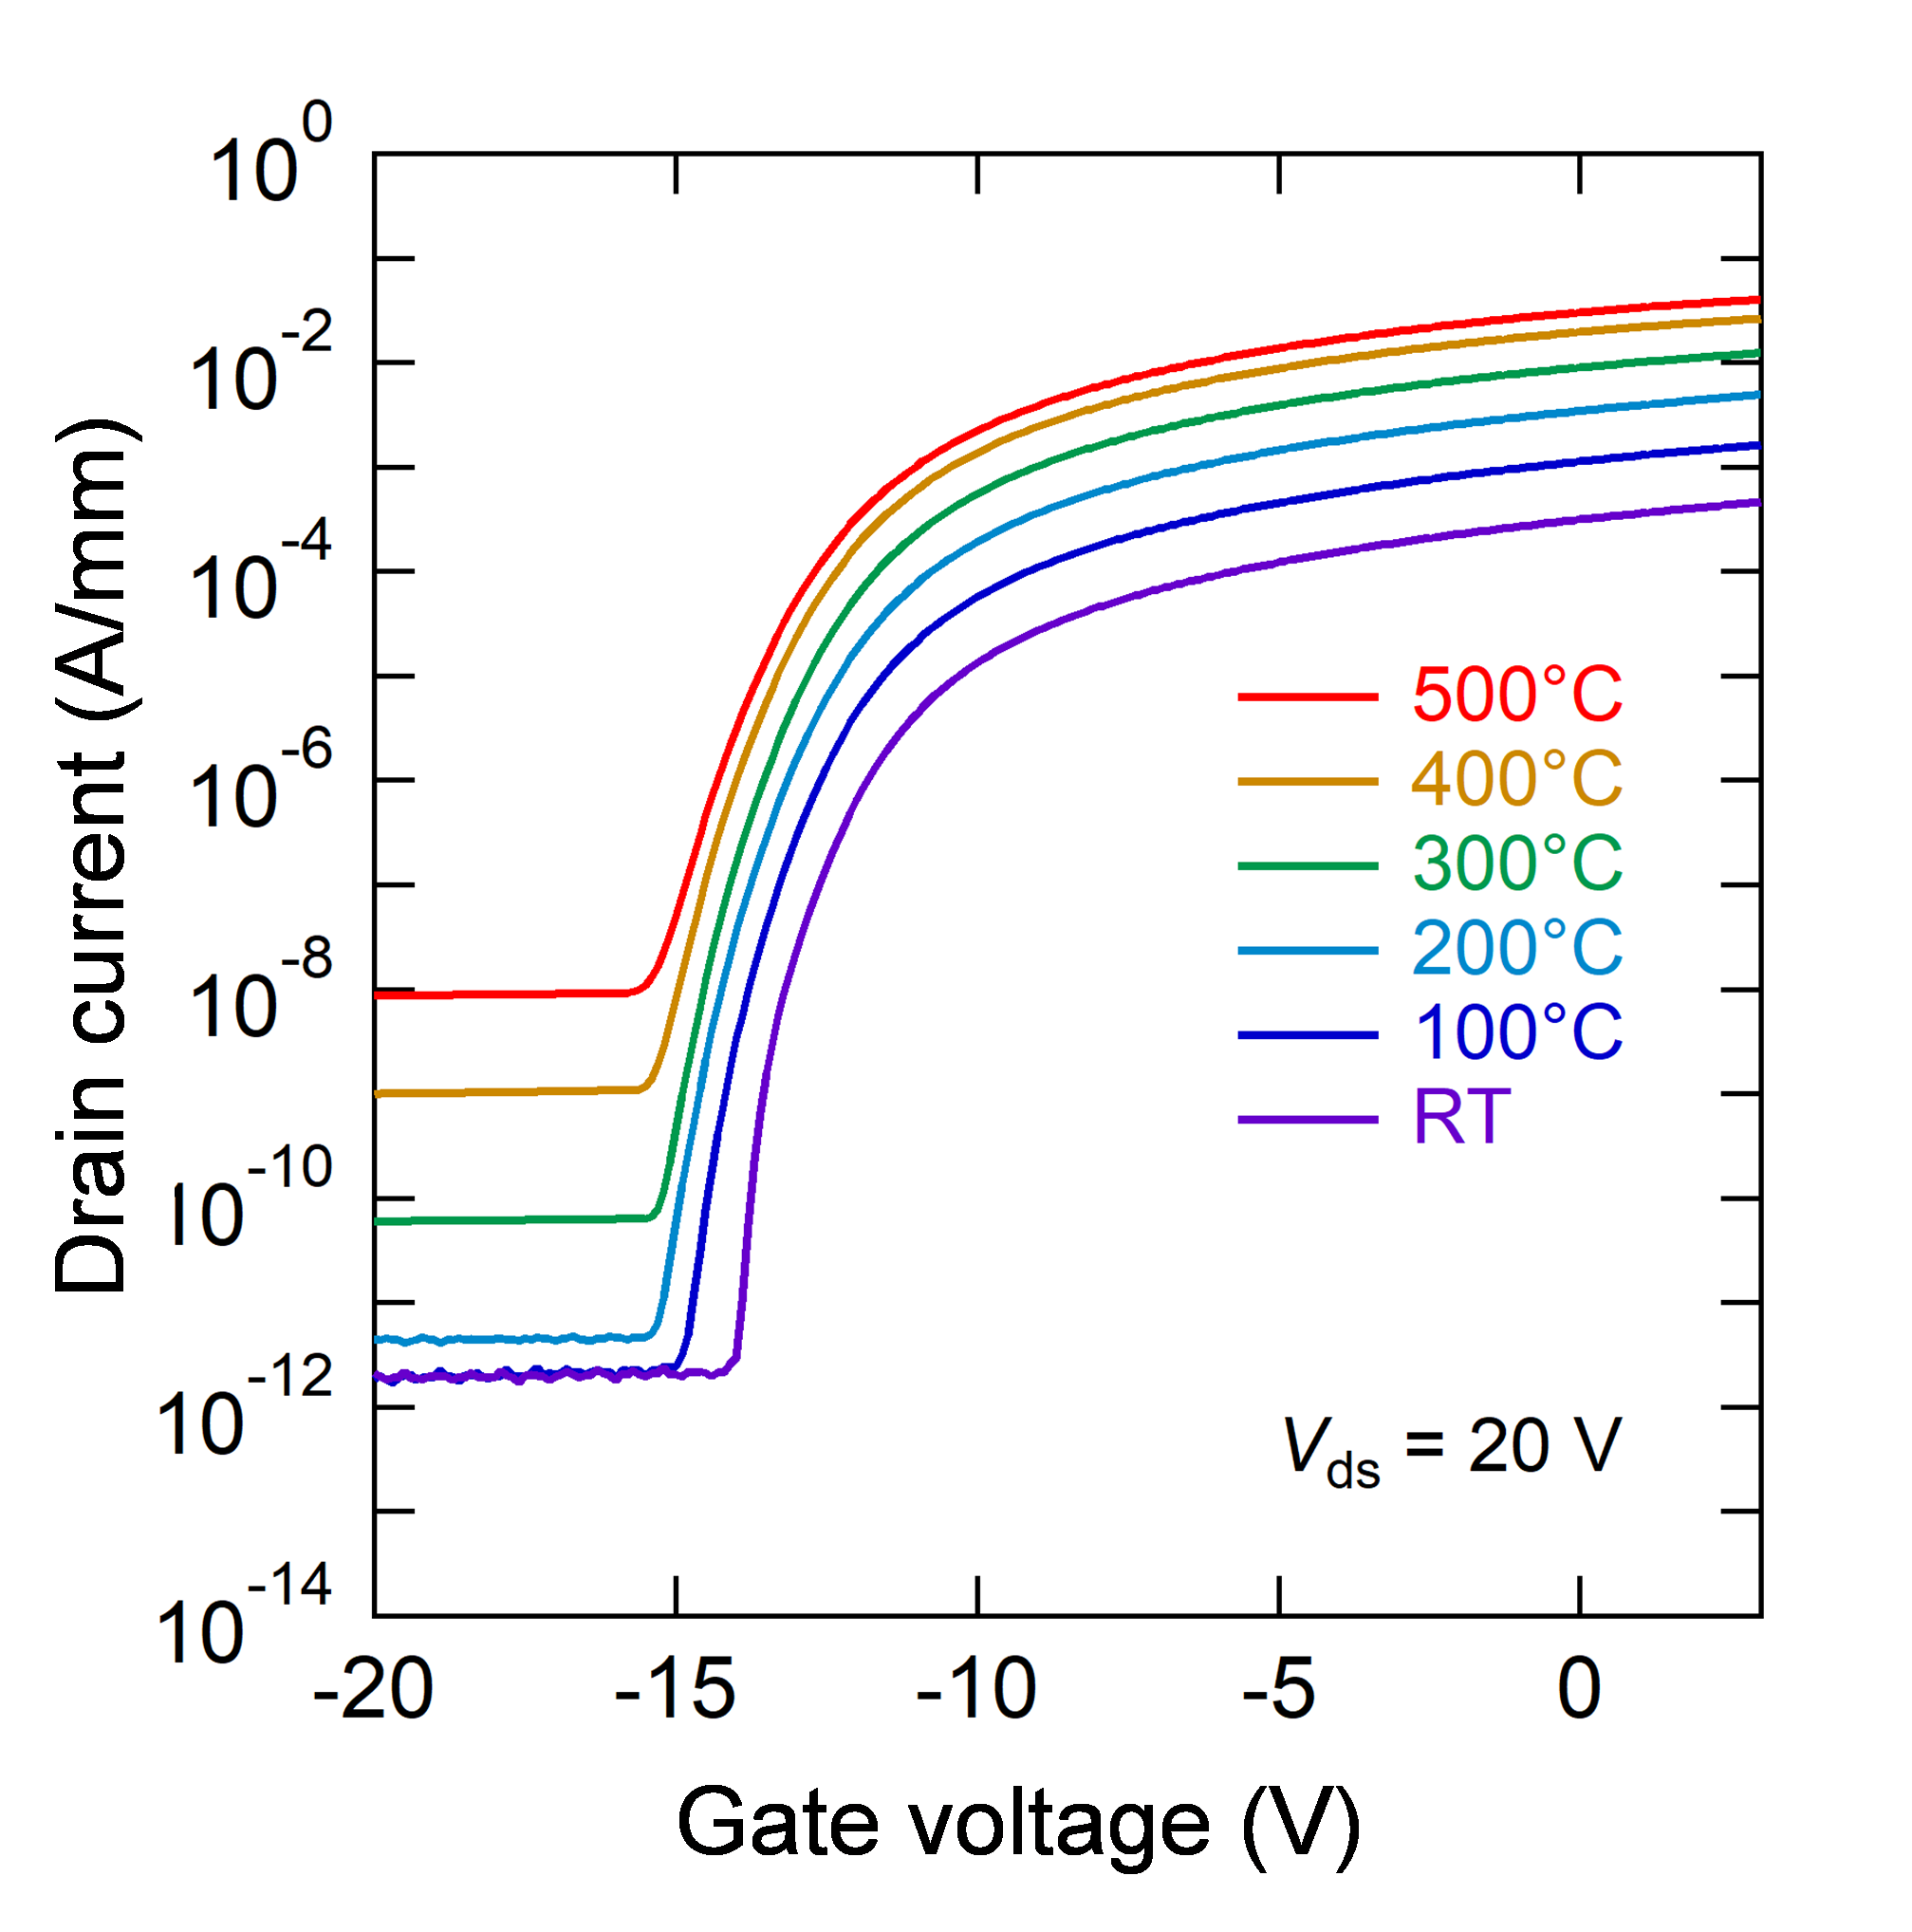 Figure 4. Drain current vs. gate voltage characteristics of AlN transistor from room temperature (RT) to 500°C.